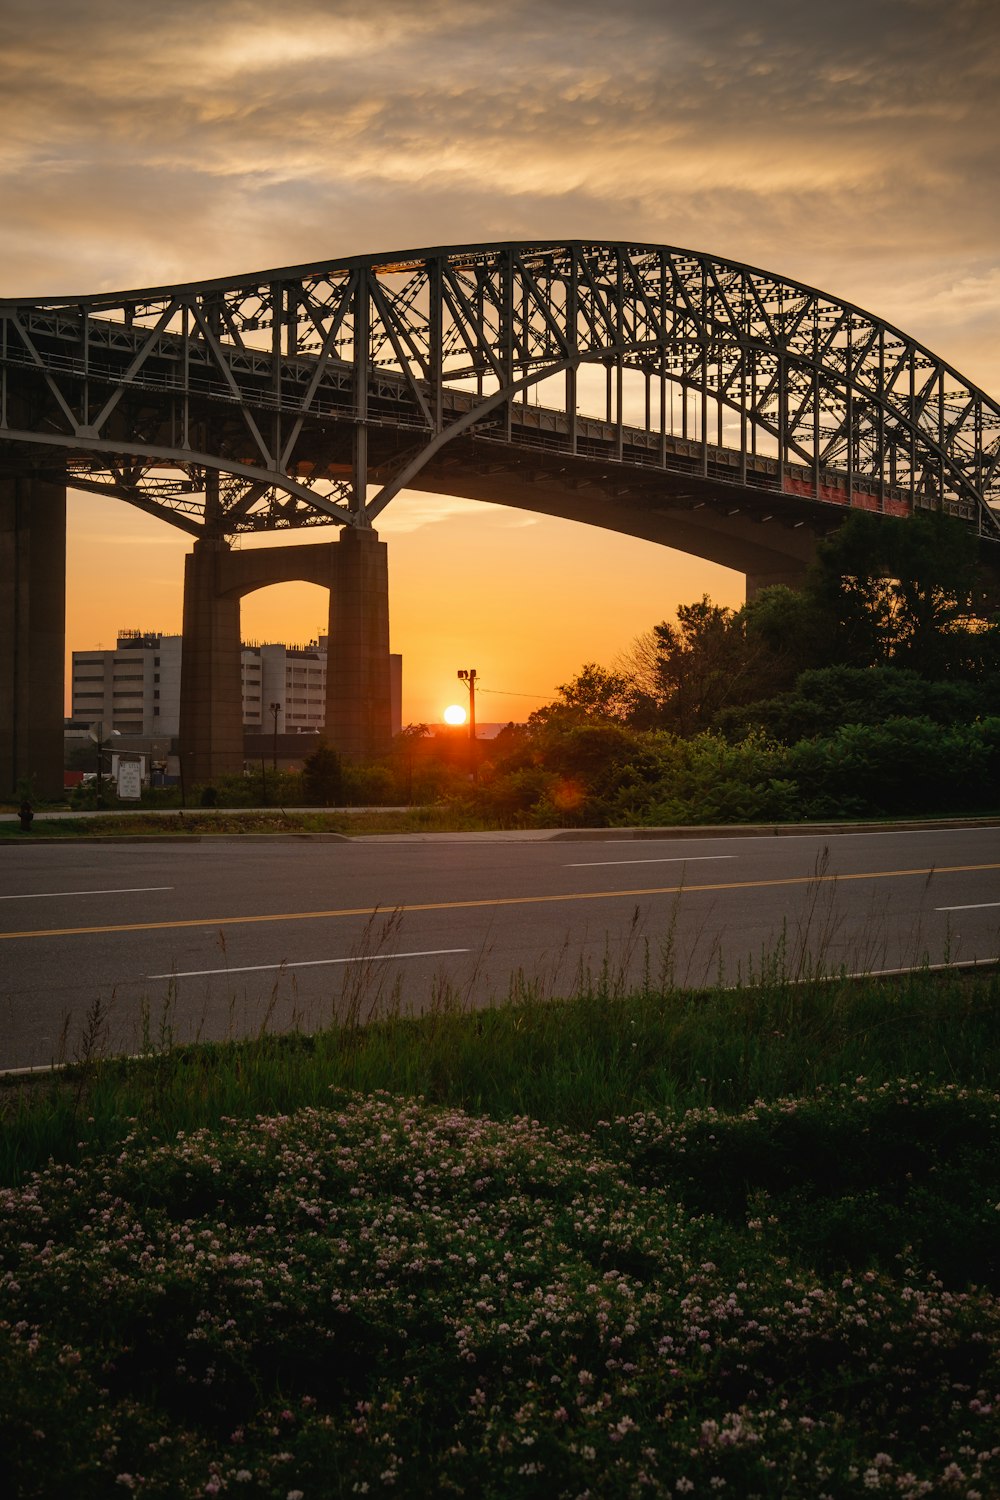 the sun is setting behind a bridge over a highway